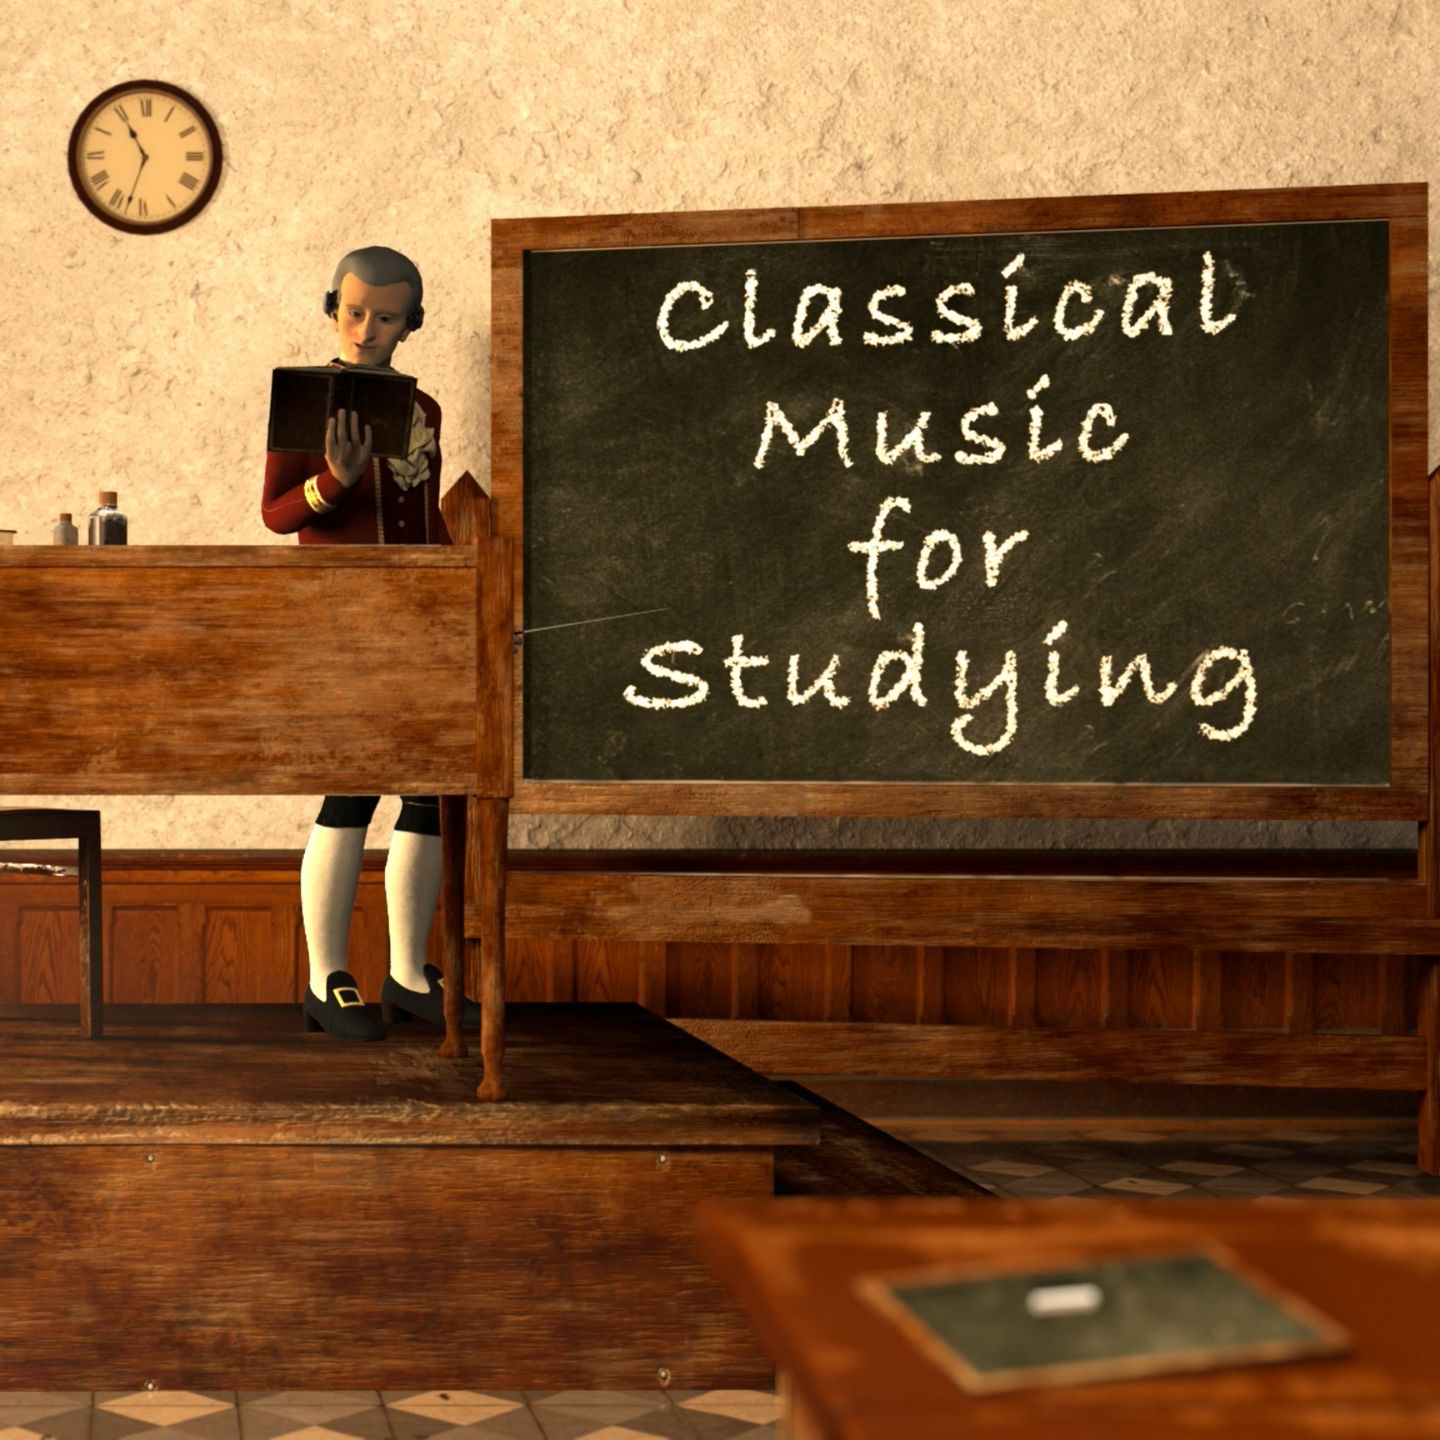 4 Hours Mozart for Studying, Concentration and Relaxation